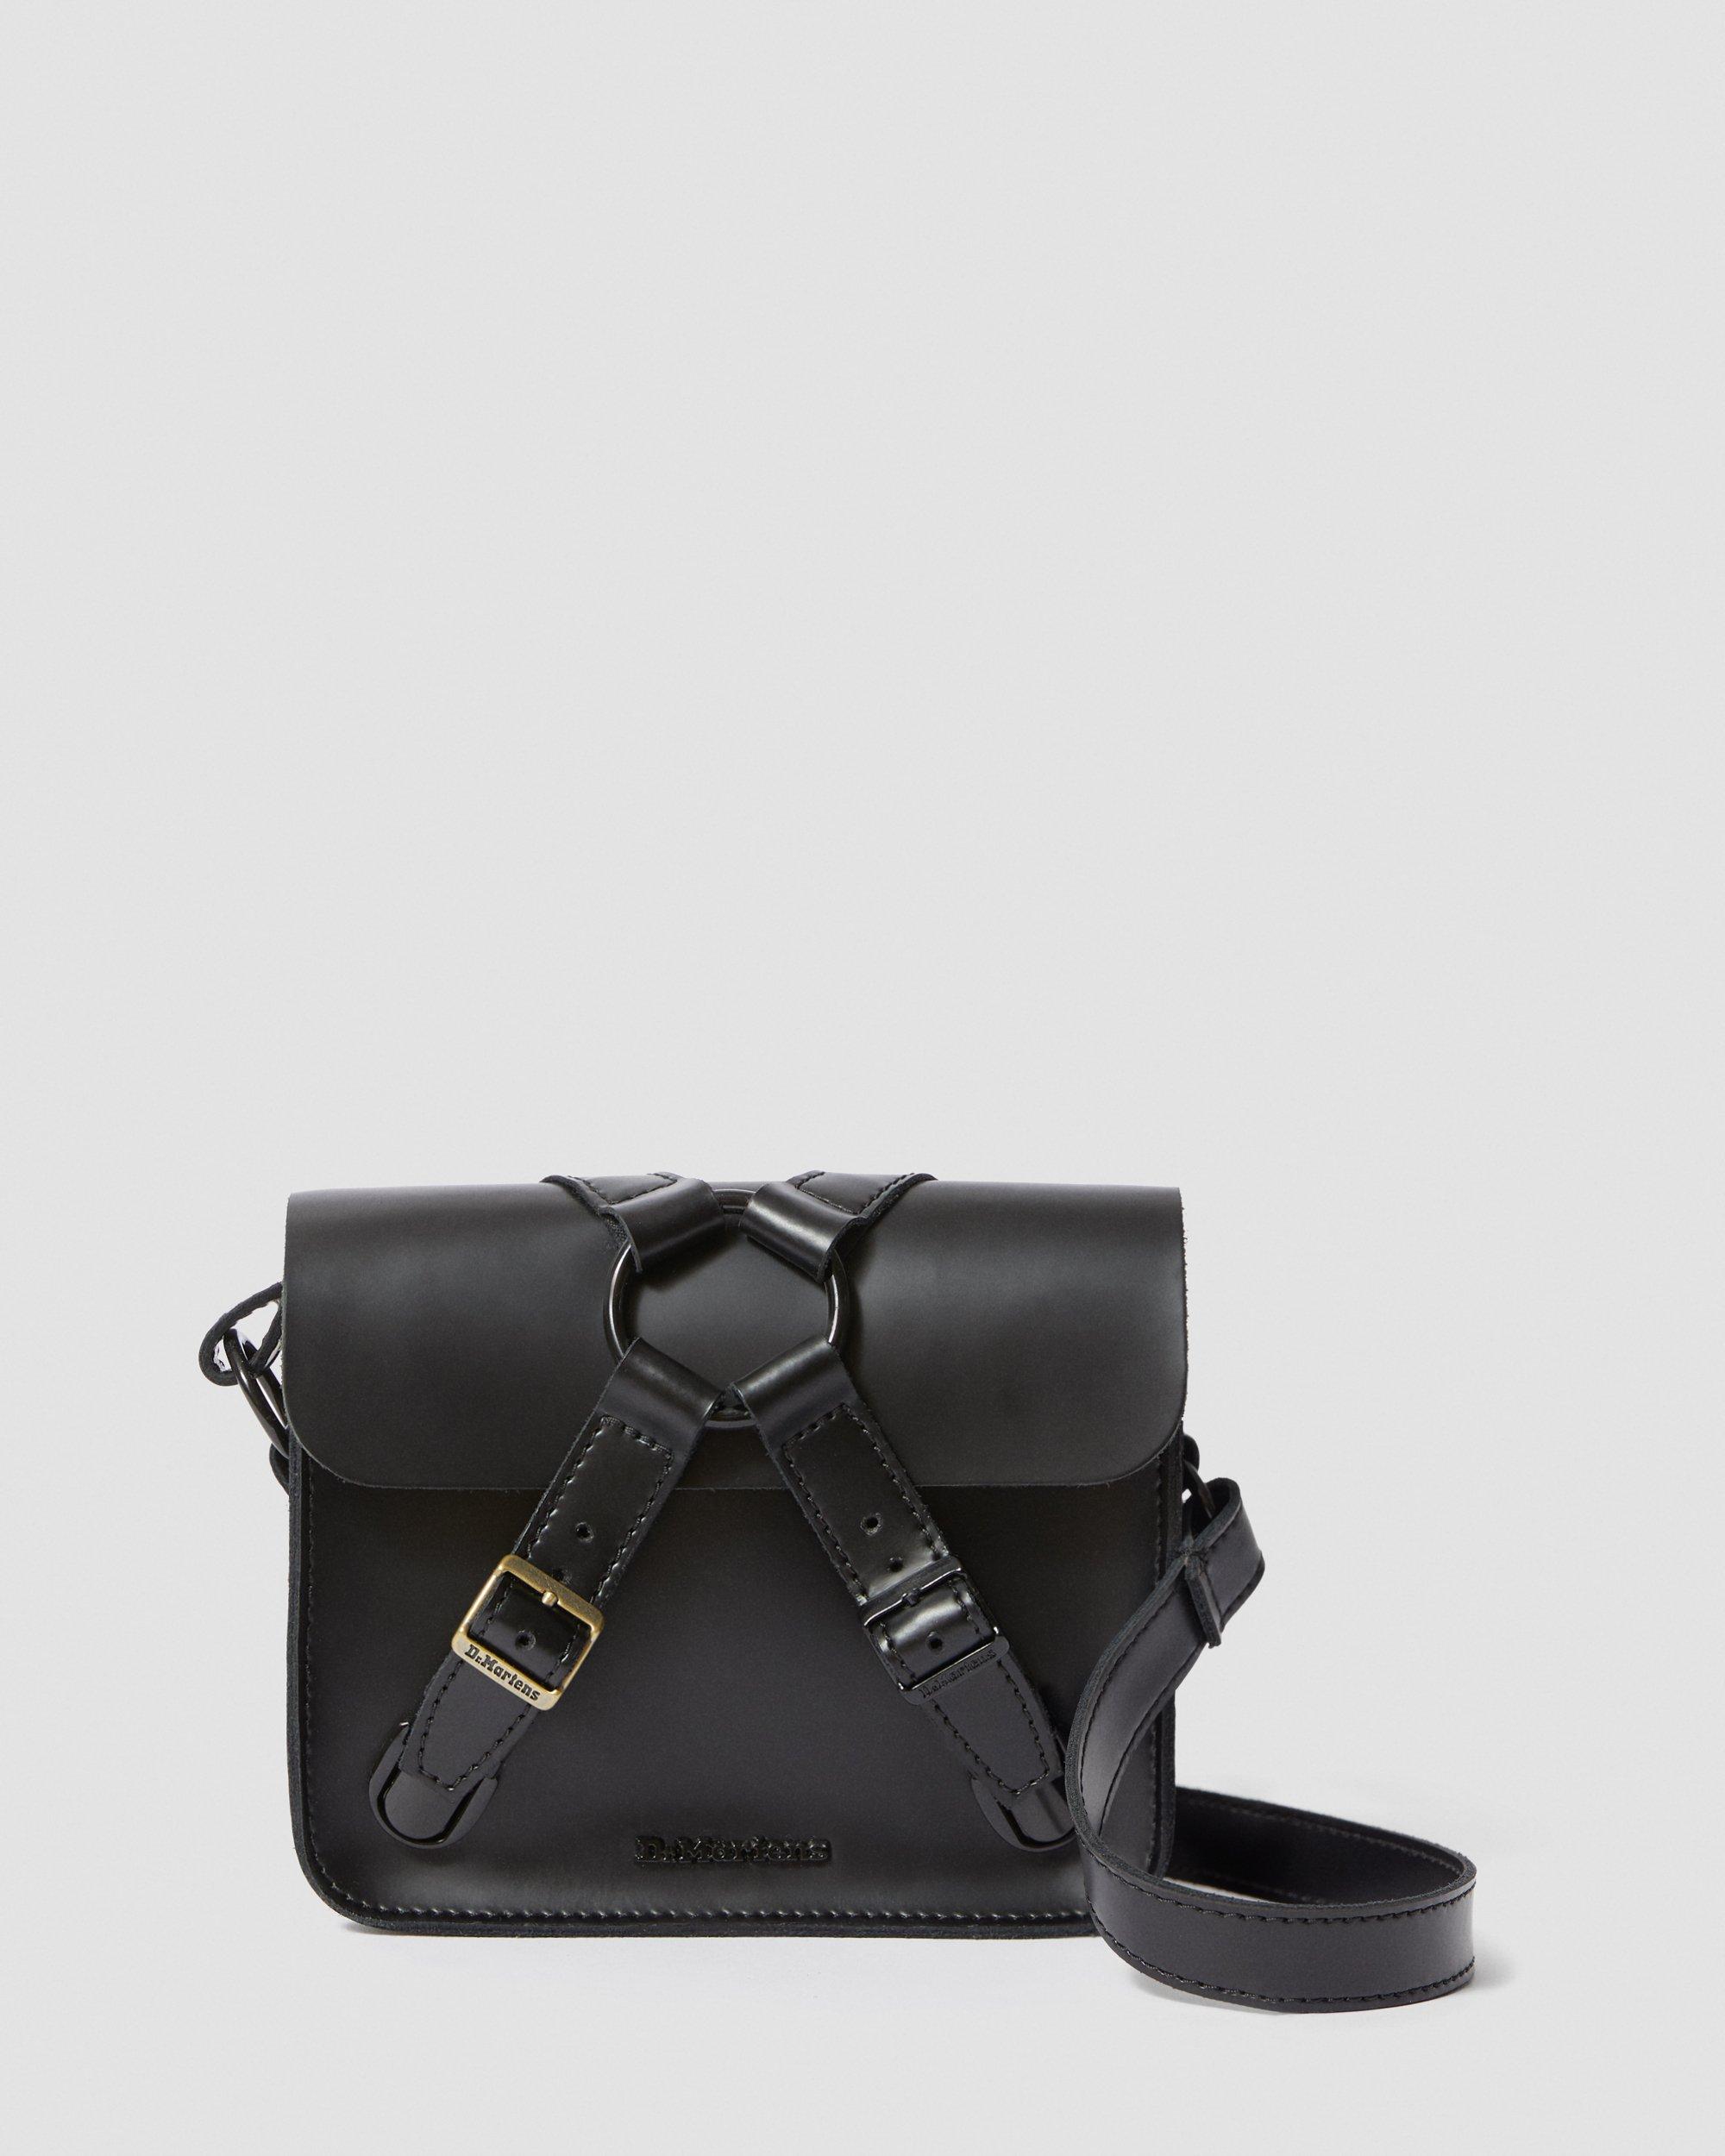 7 Inch Leather Buckle Satchel Dr. Martens